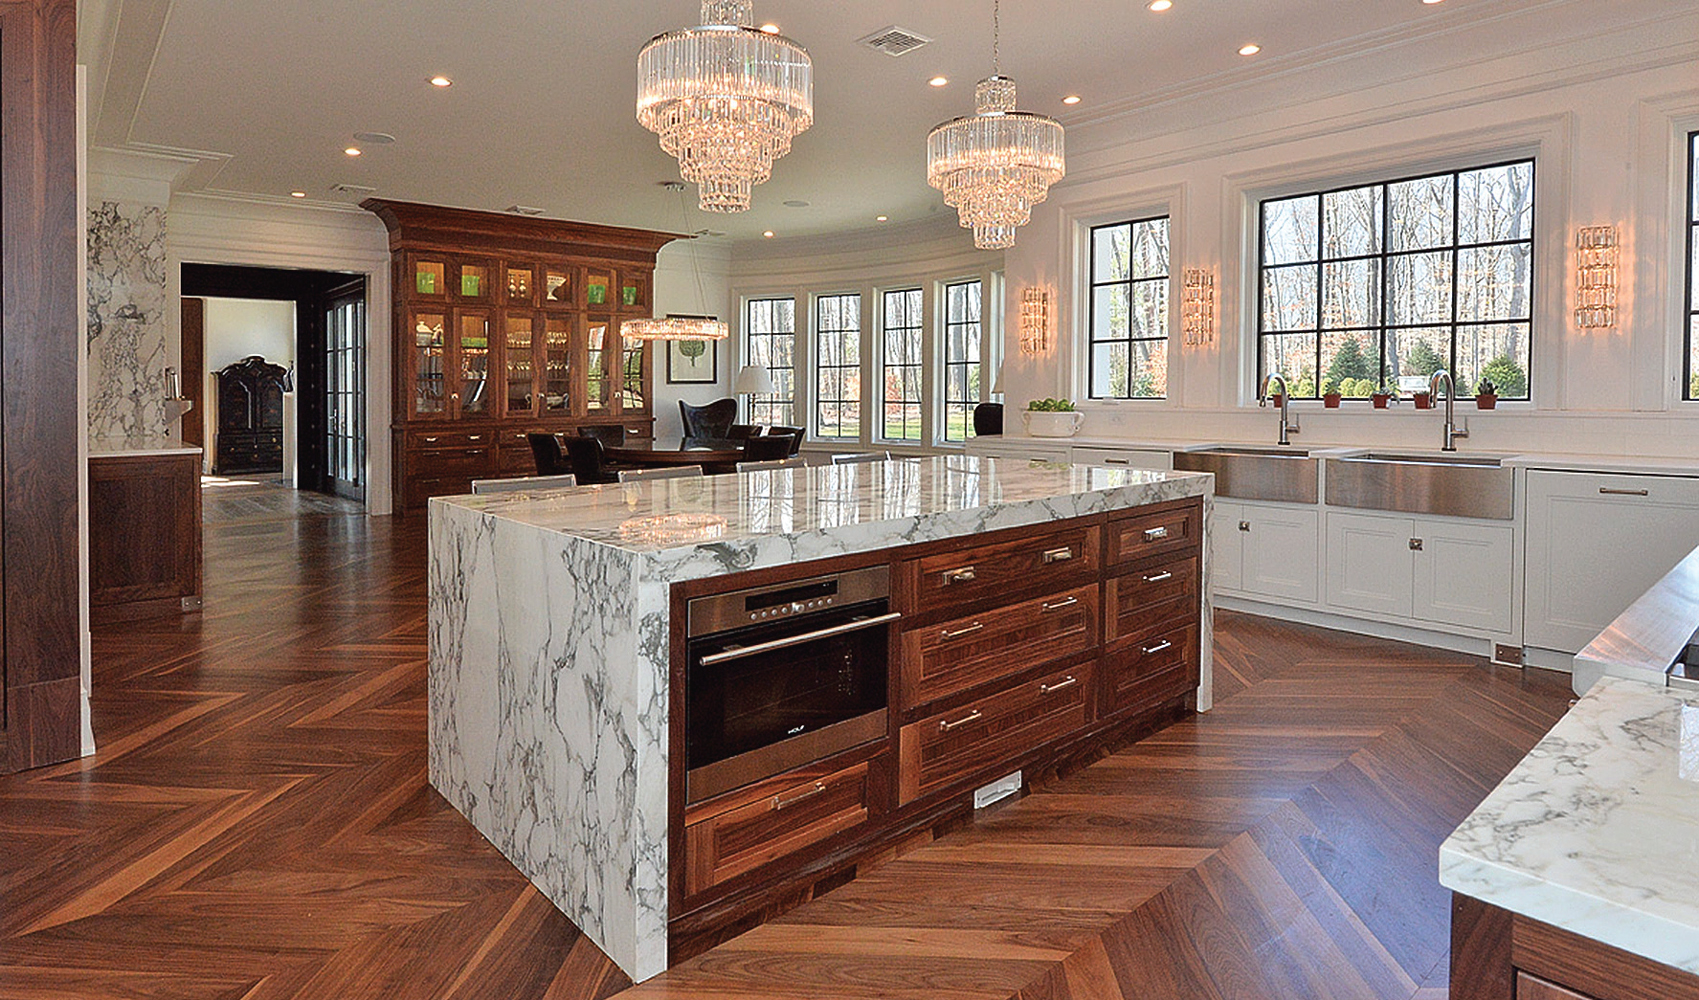 The Lure of Luxury Kitchens